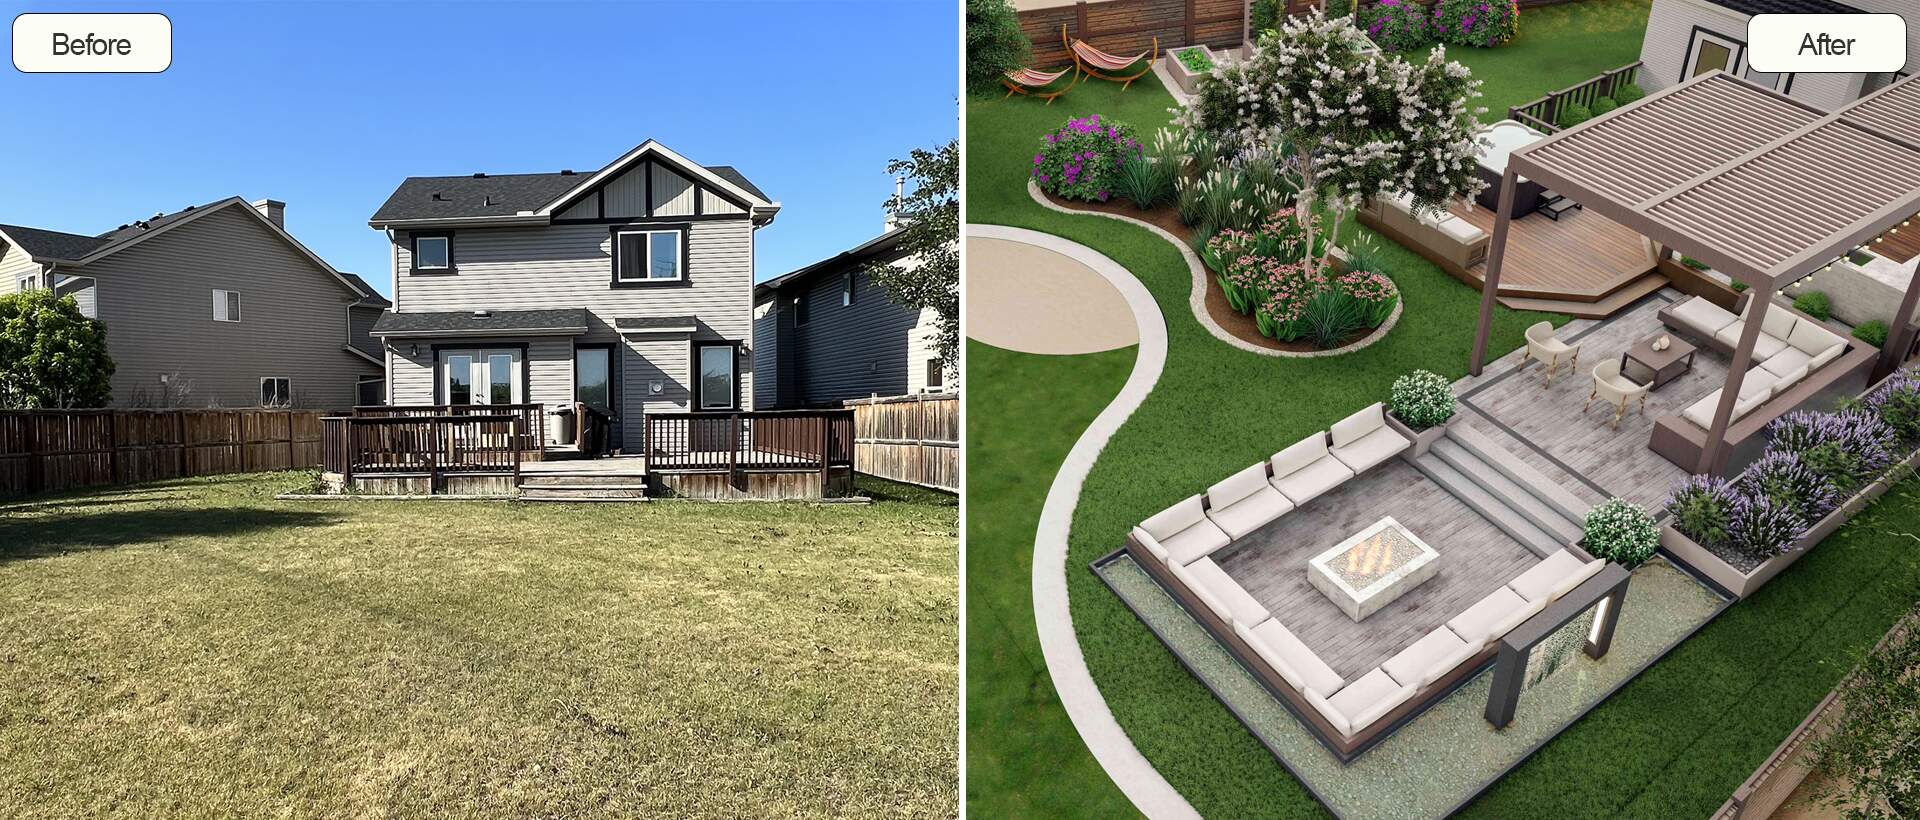 Full yard transformation showcasing a before and after view with a modern outdoor seating area, pergola, and vibrant landscaping, designed by Homely Design Experts.